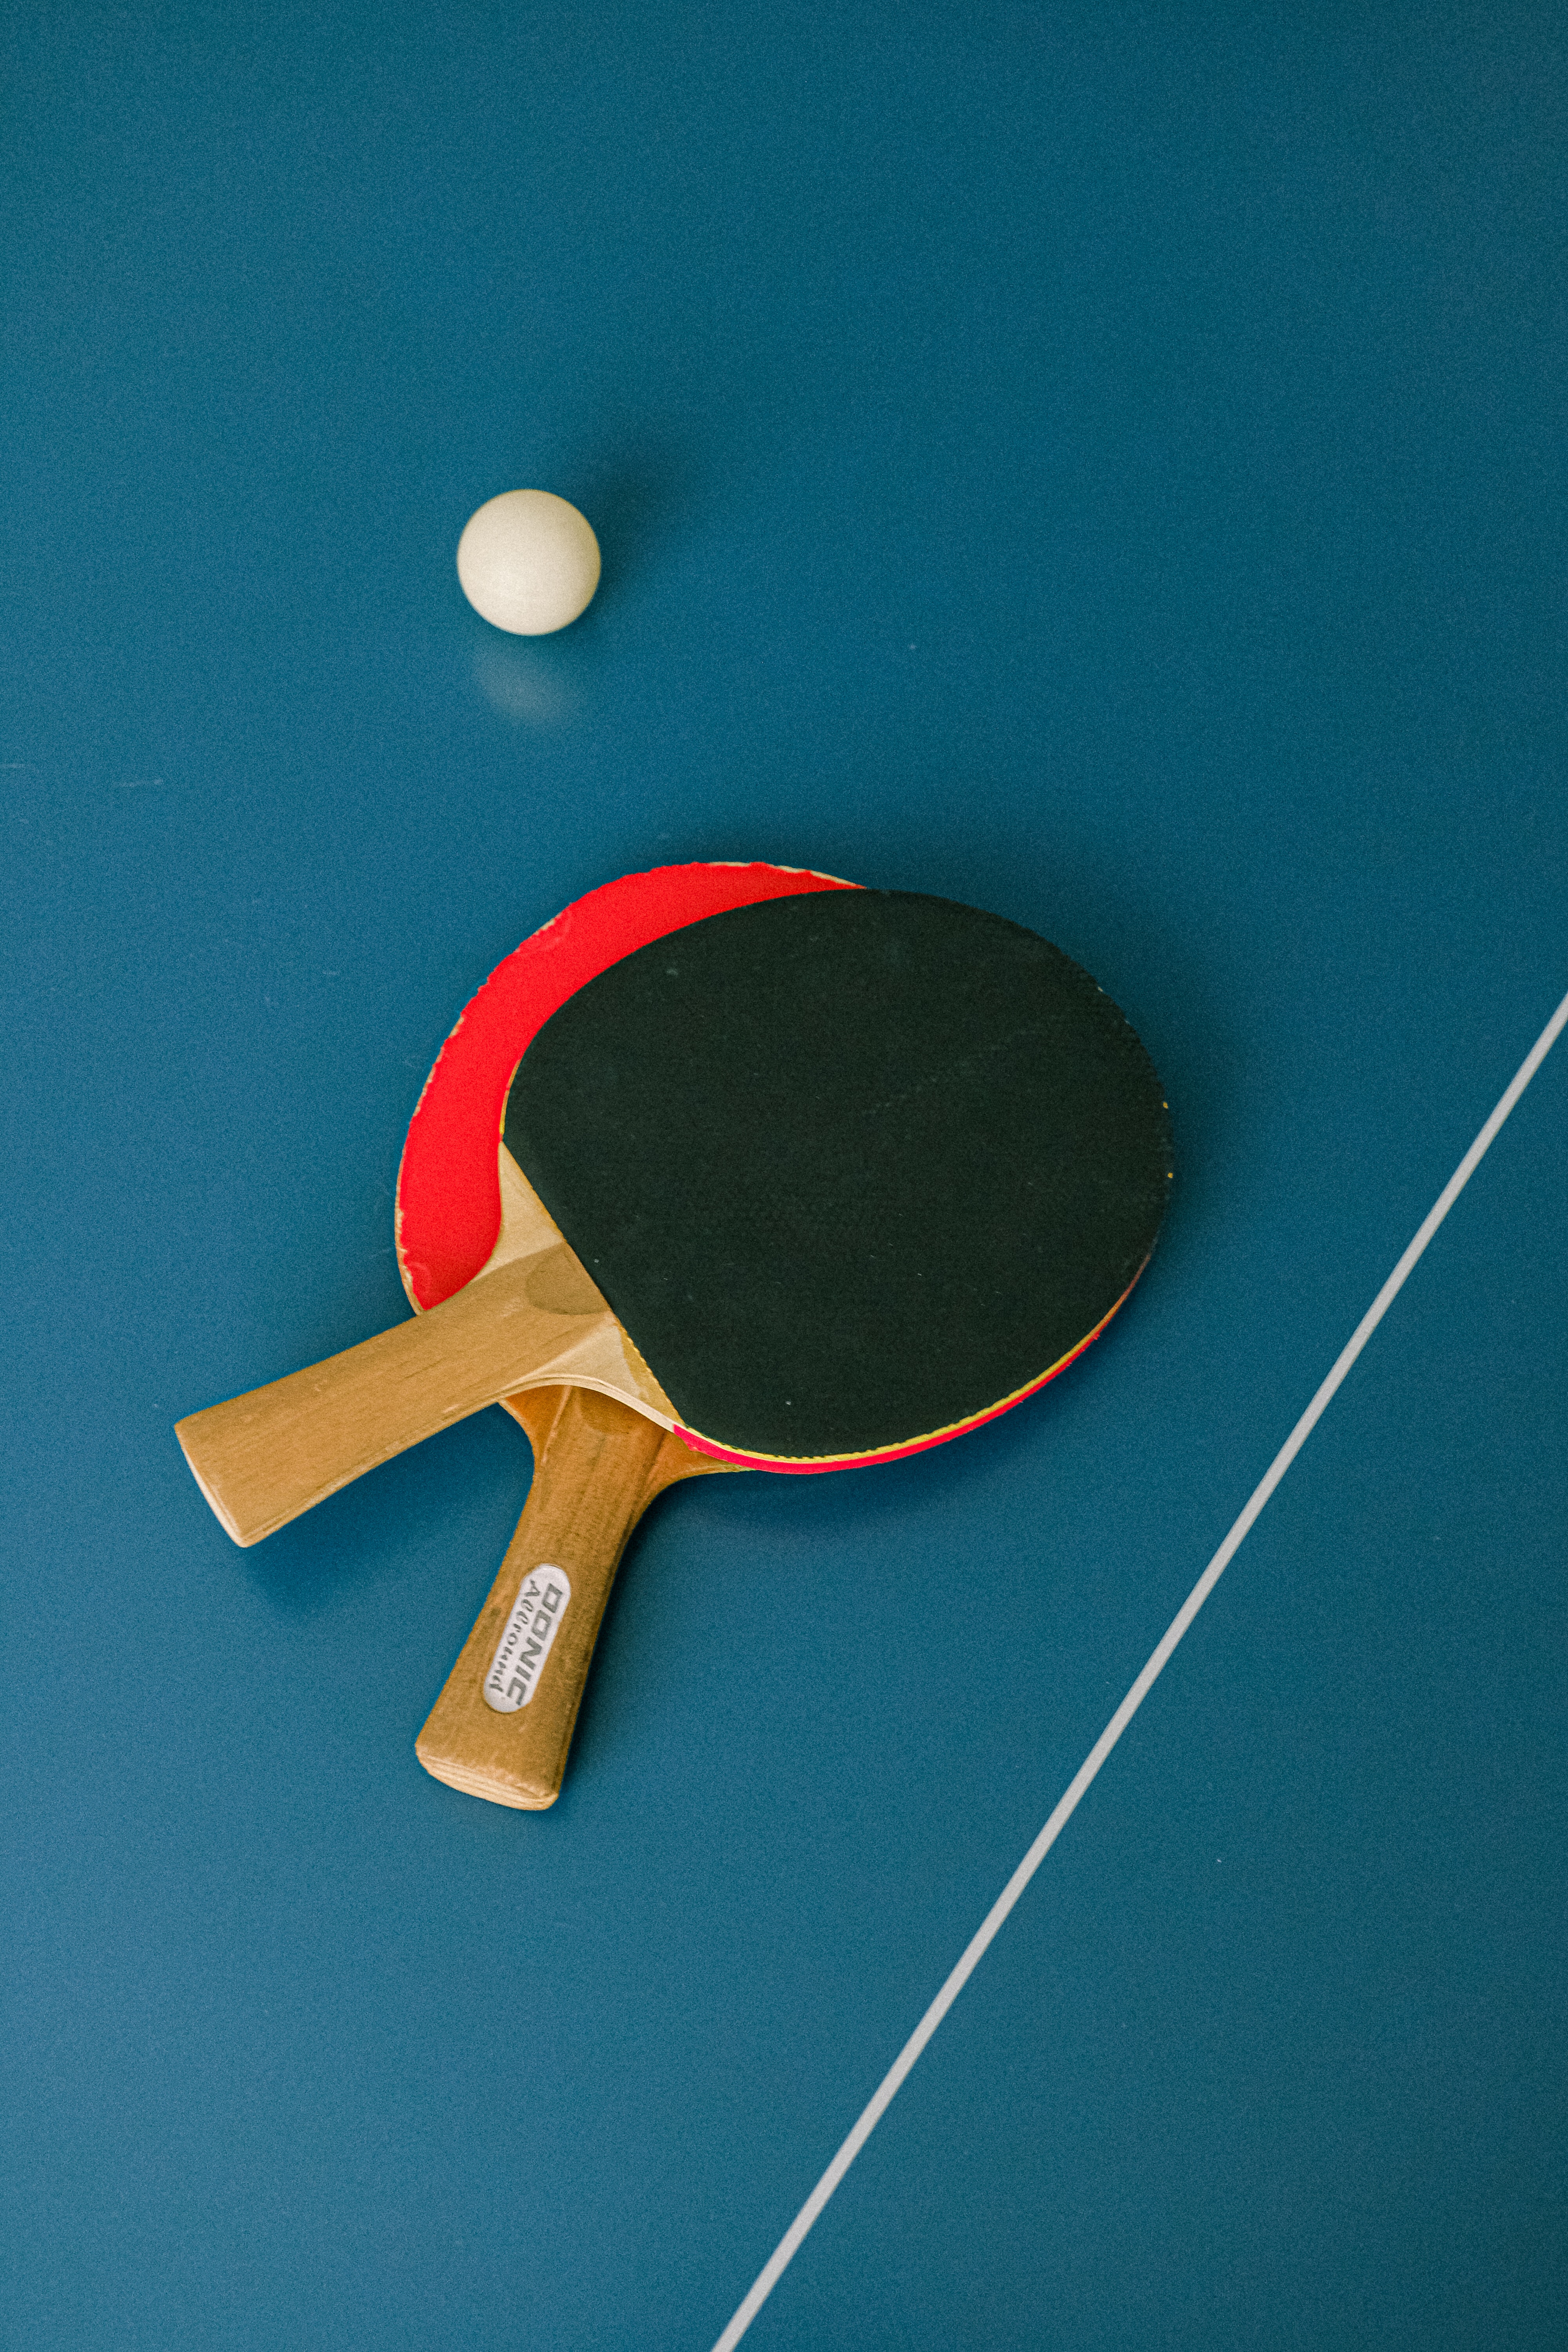 Table tennis photos download the best free table tennis stock photos hd images